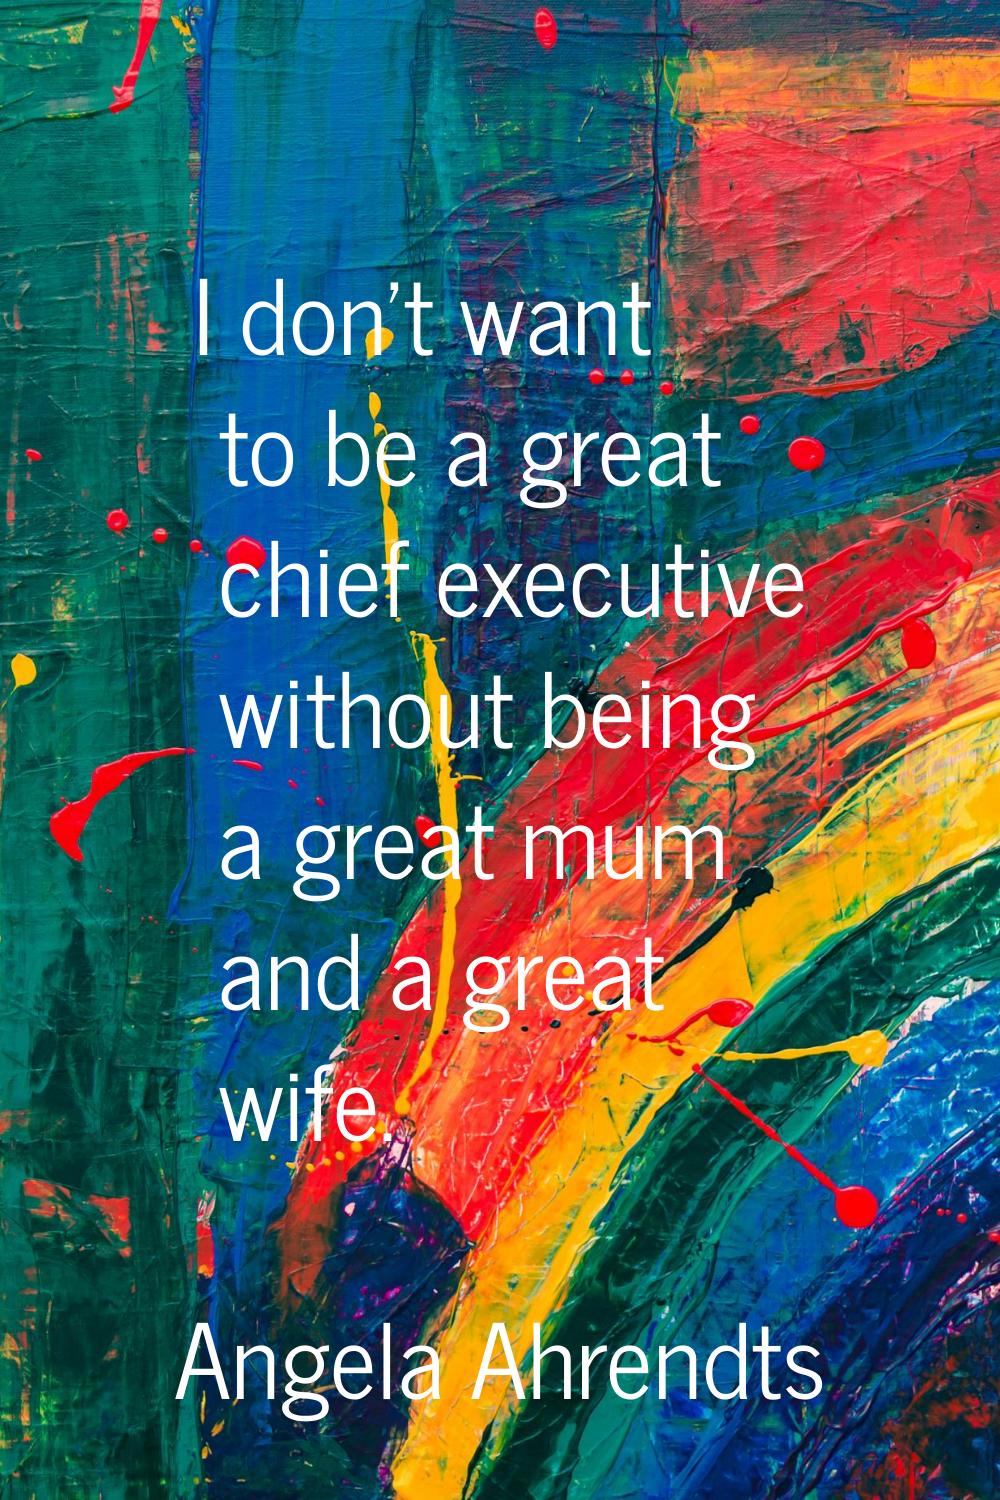 I don't want to be a great chief executive without being a great mum and a great wife.